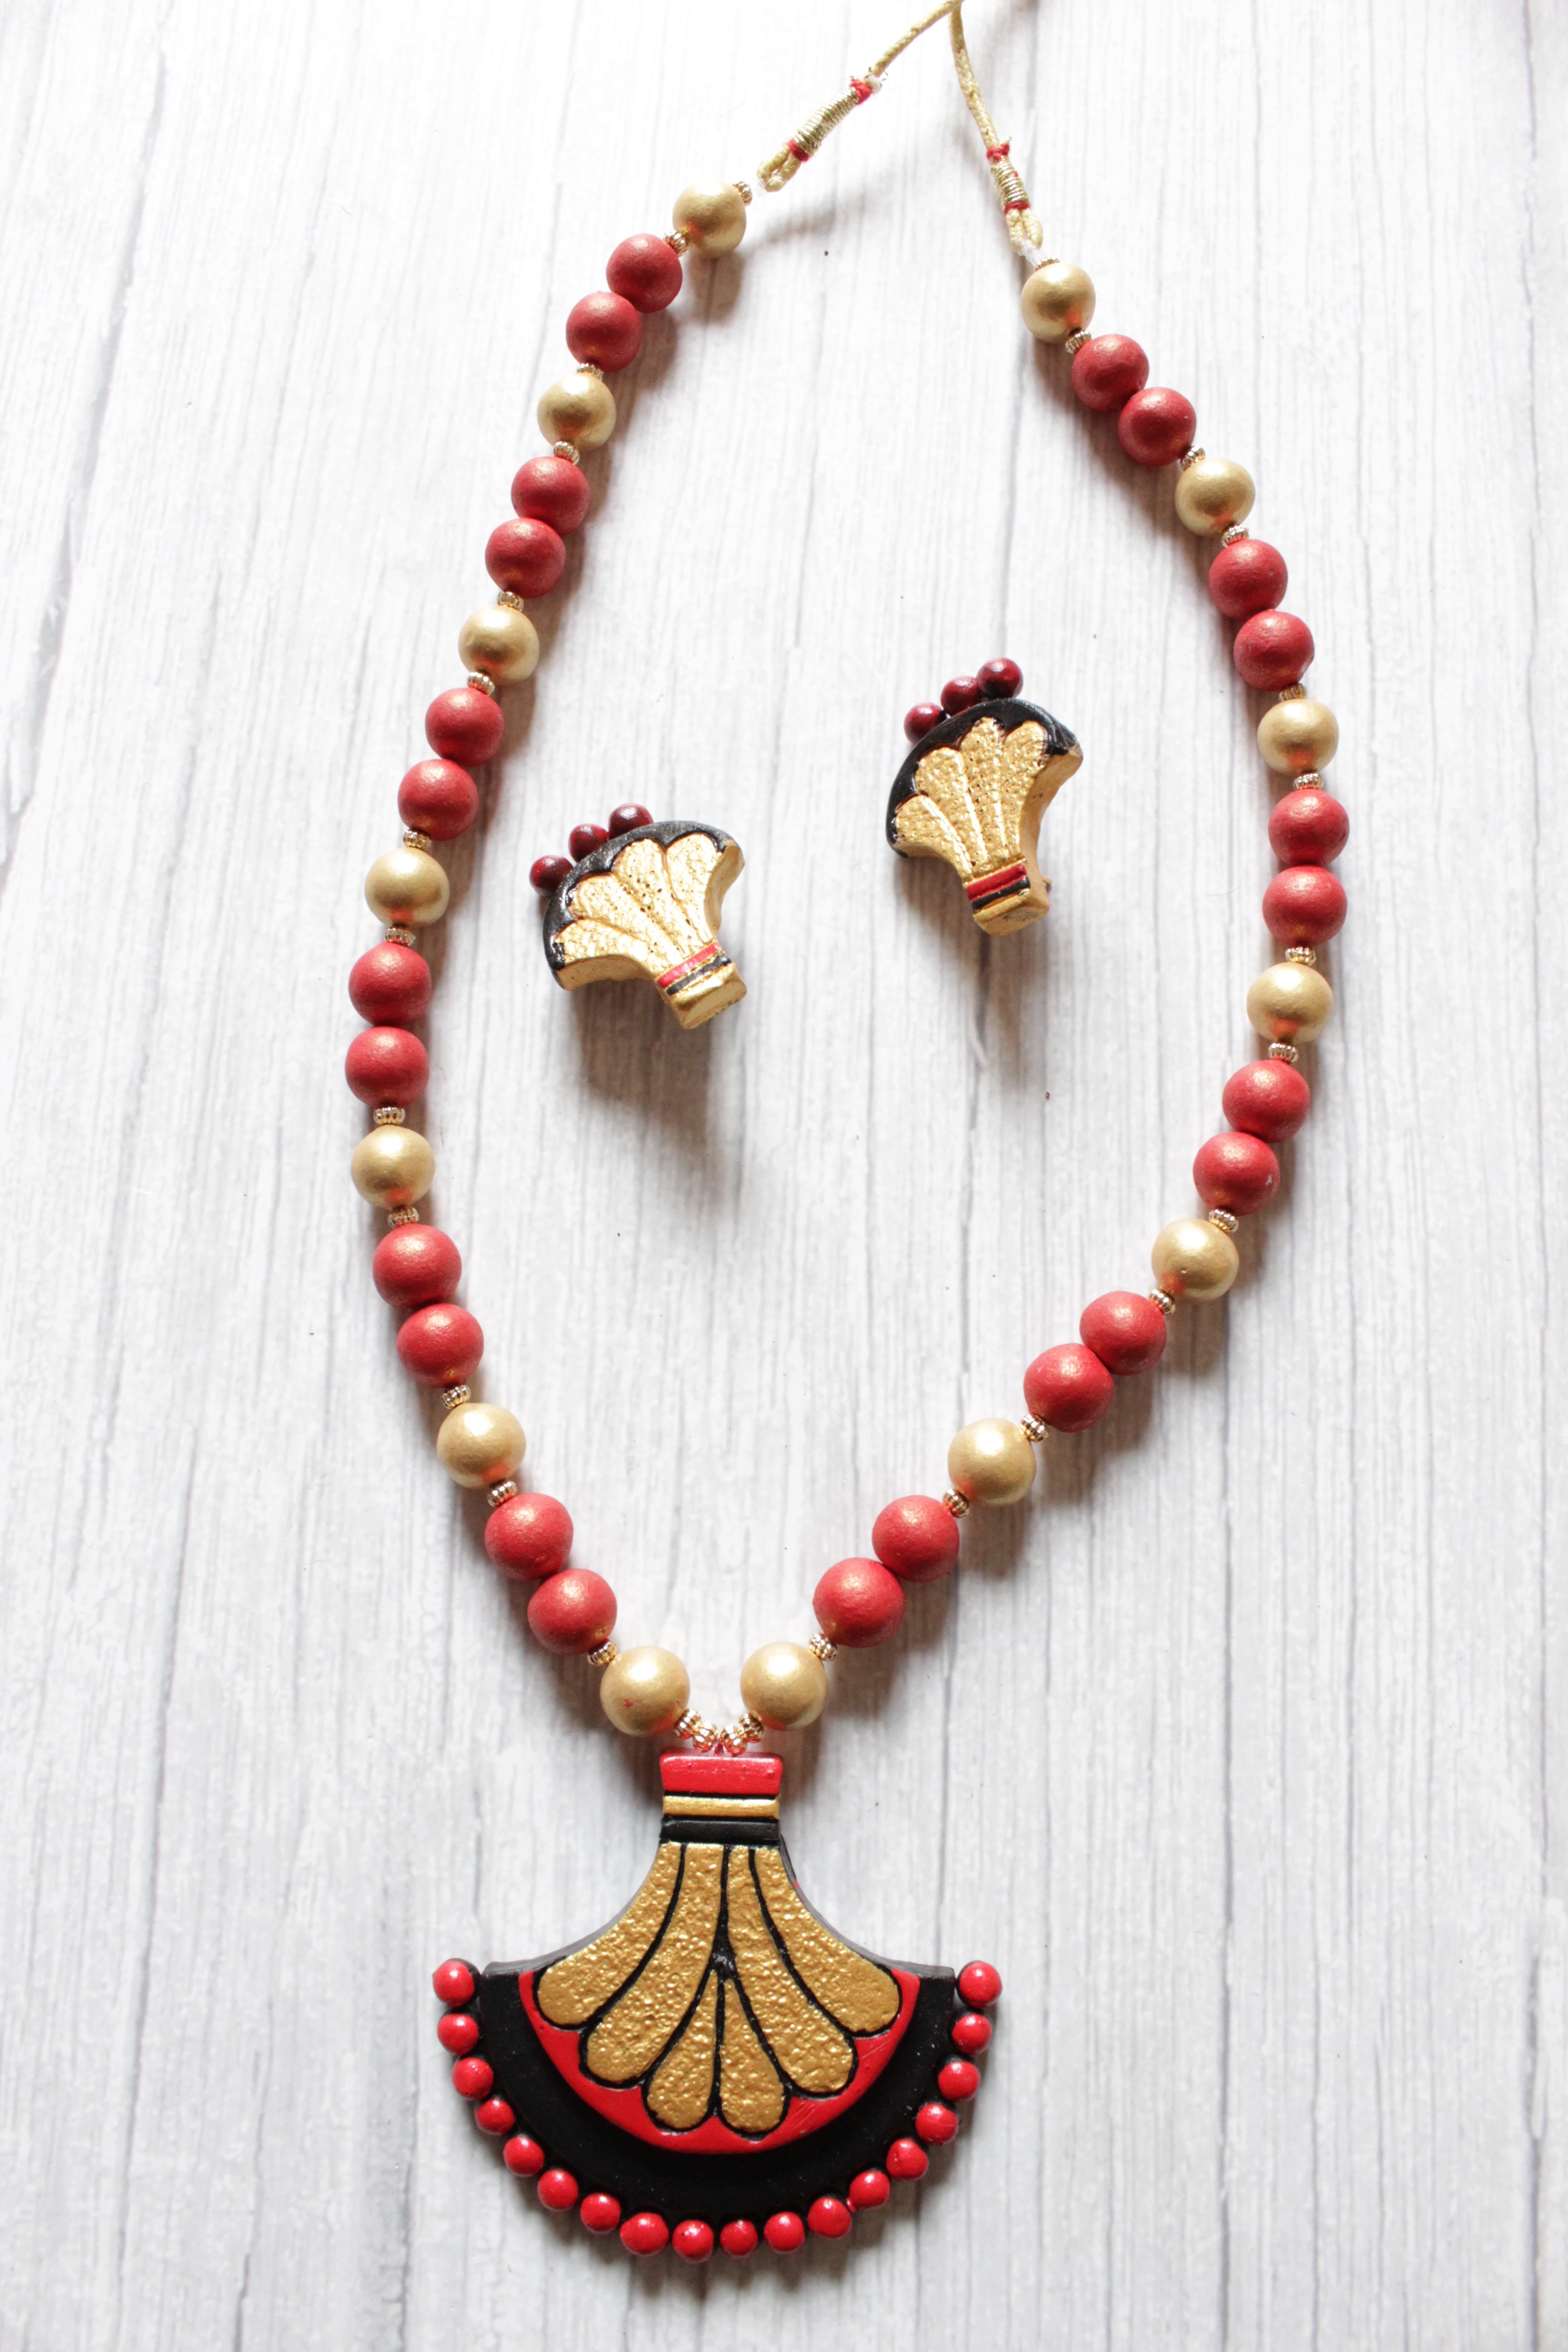 Handcrafted Red and Golden Beads Terracotta Clay Necklace Set